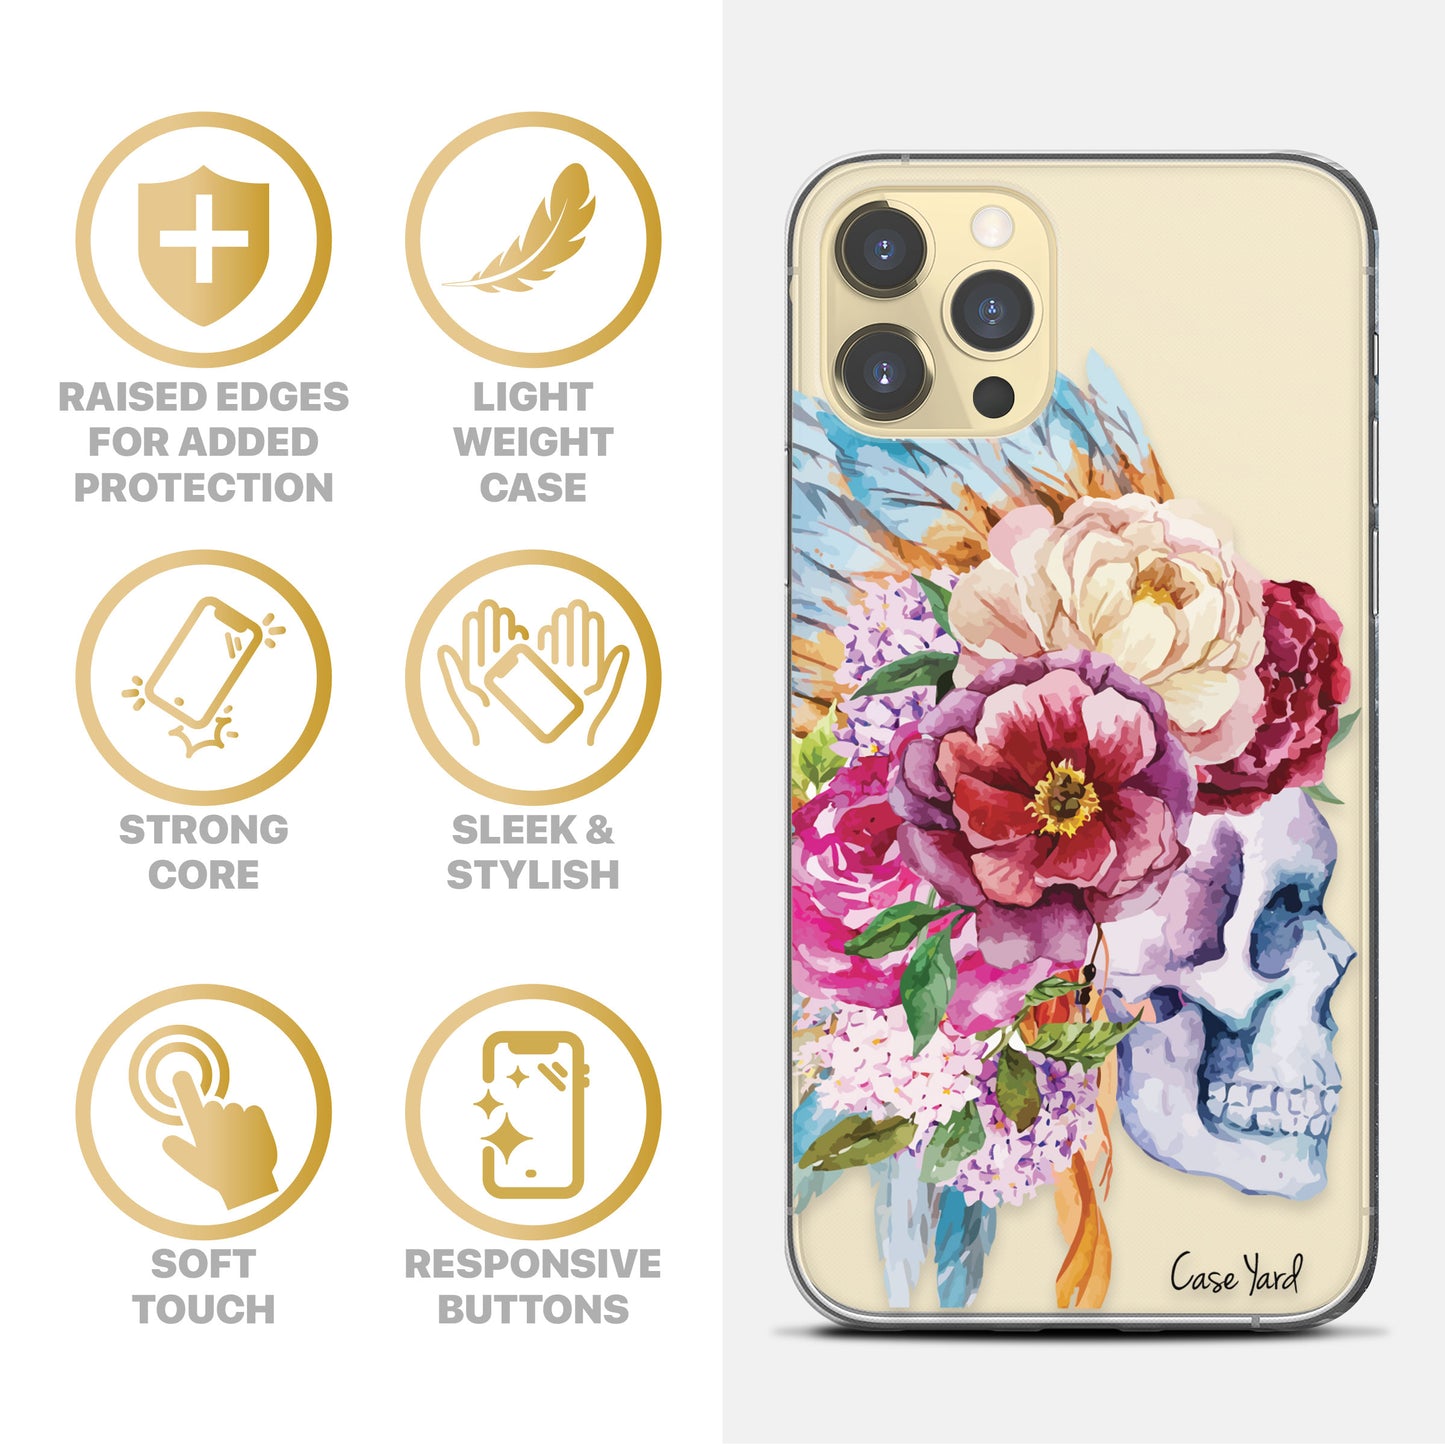 TPU Clear case with (Watercolor Skull) Design for iPhone & Samsung Phones